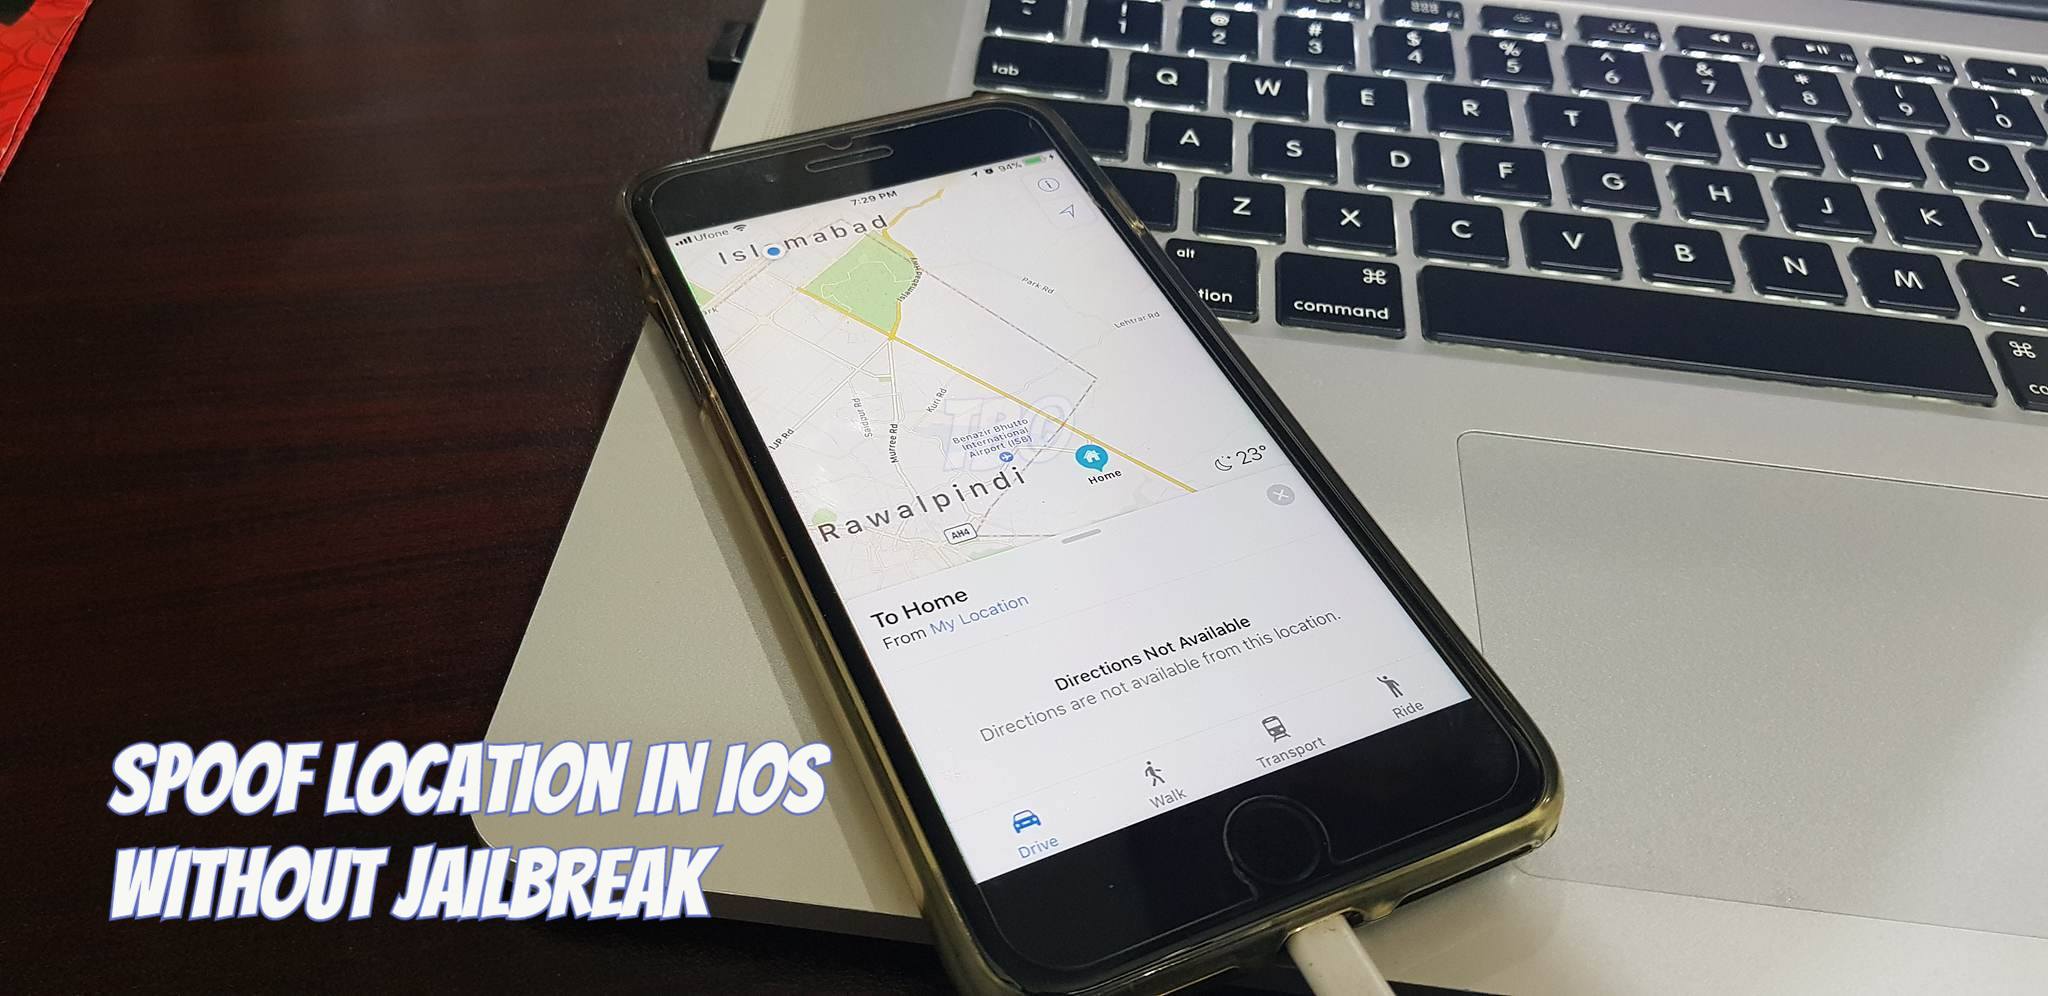 Spoof Location In iOS Without Jailbreak